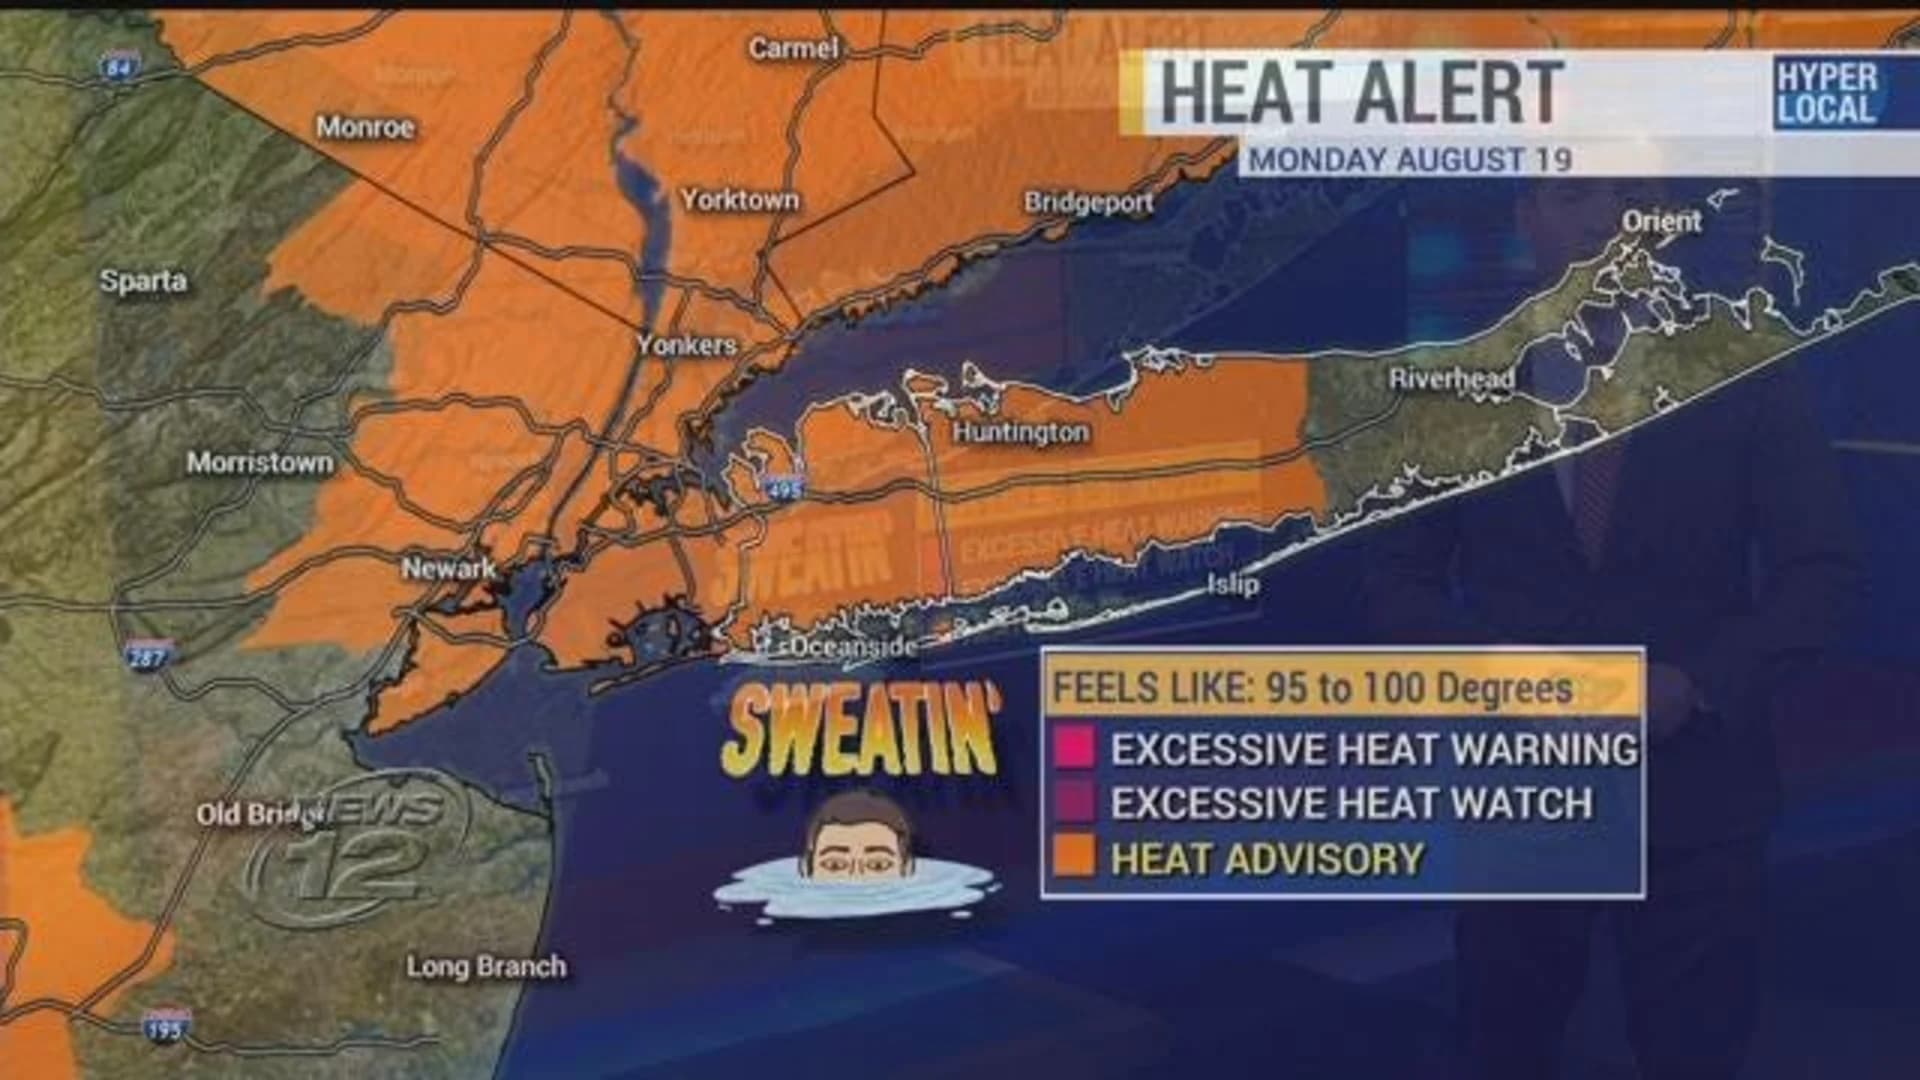 Severe thunderstorm warning, heat advisory in effect for parts of LI